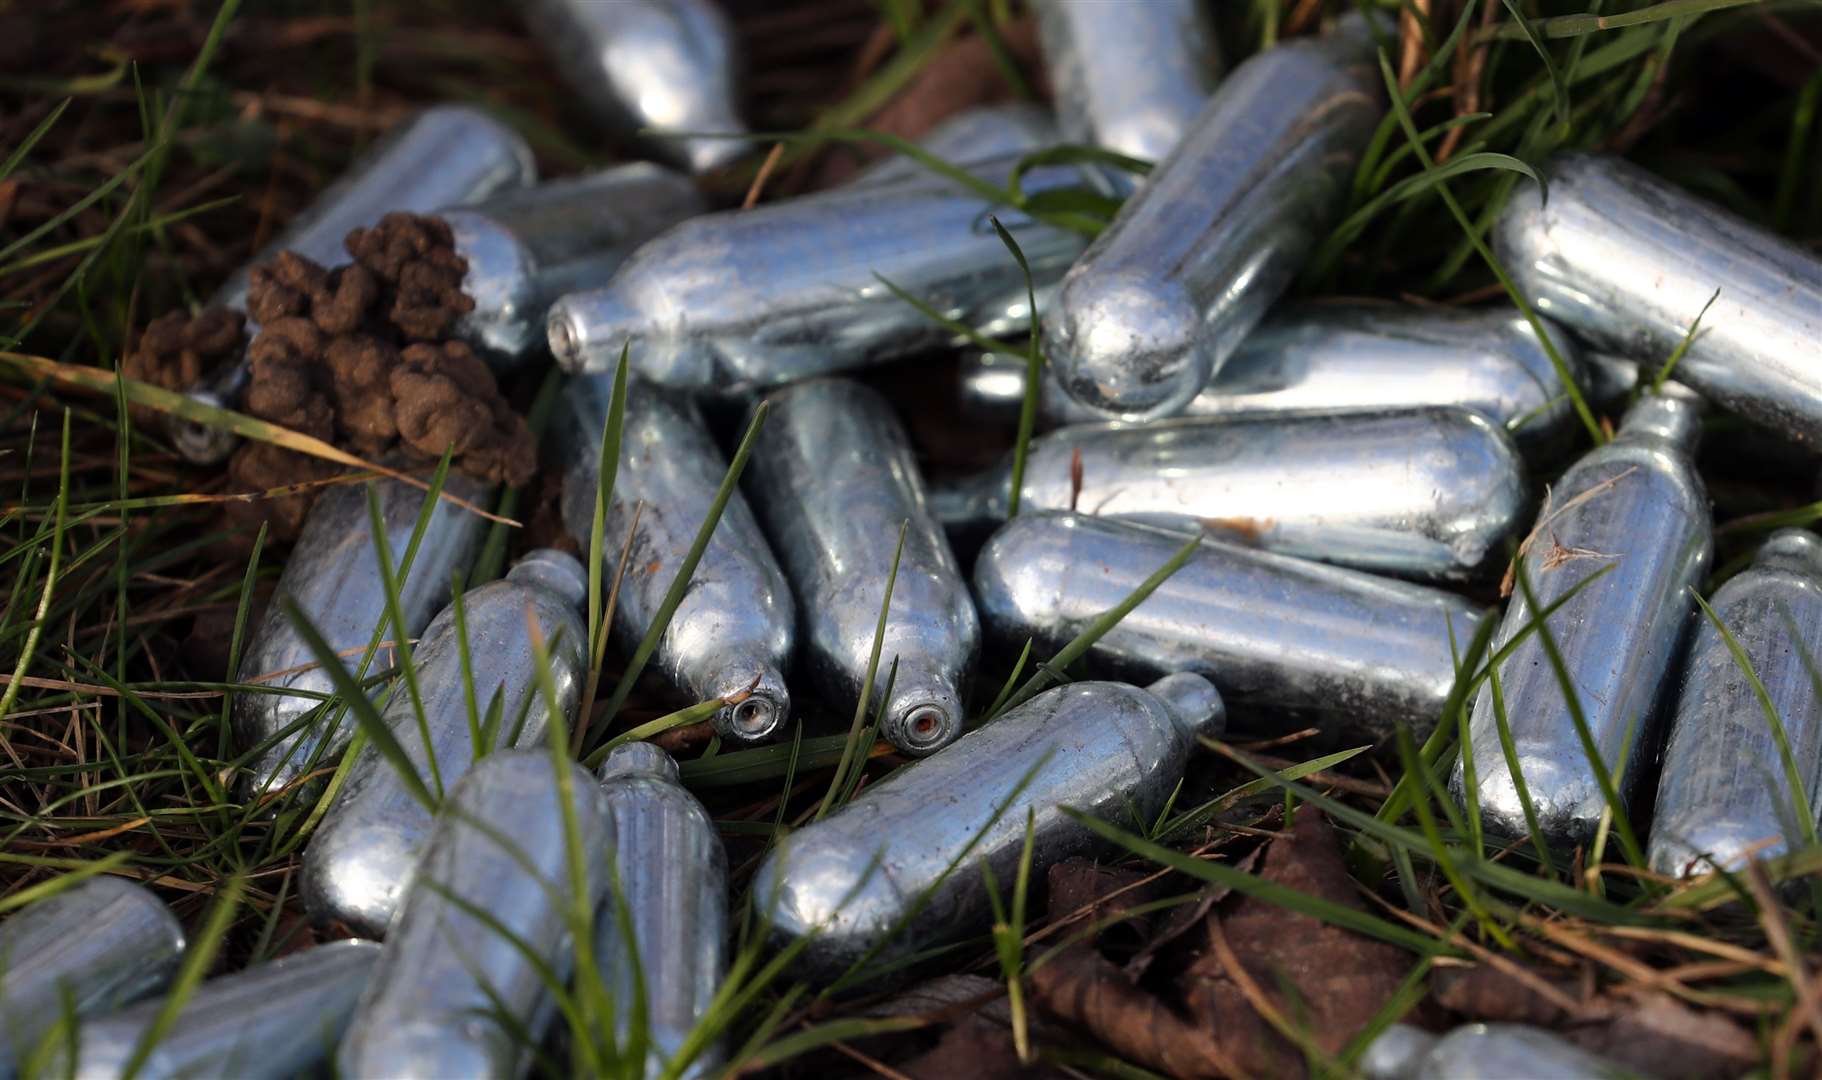 Laughing gas is to be banned as part of the crackdown (Gareth Fuller/PA)